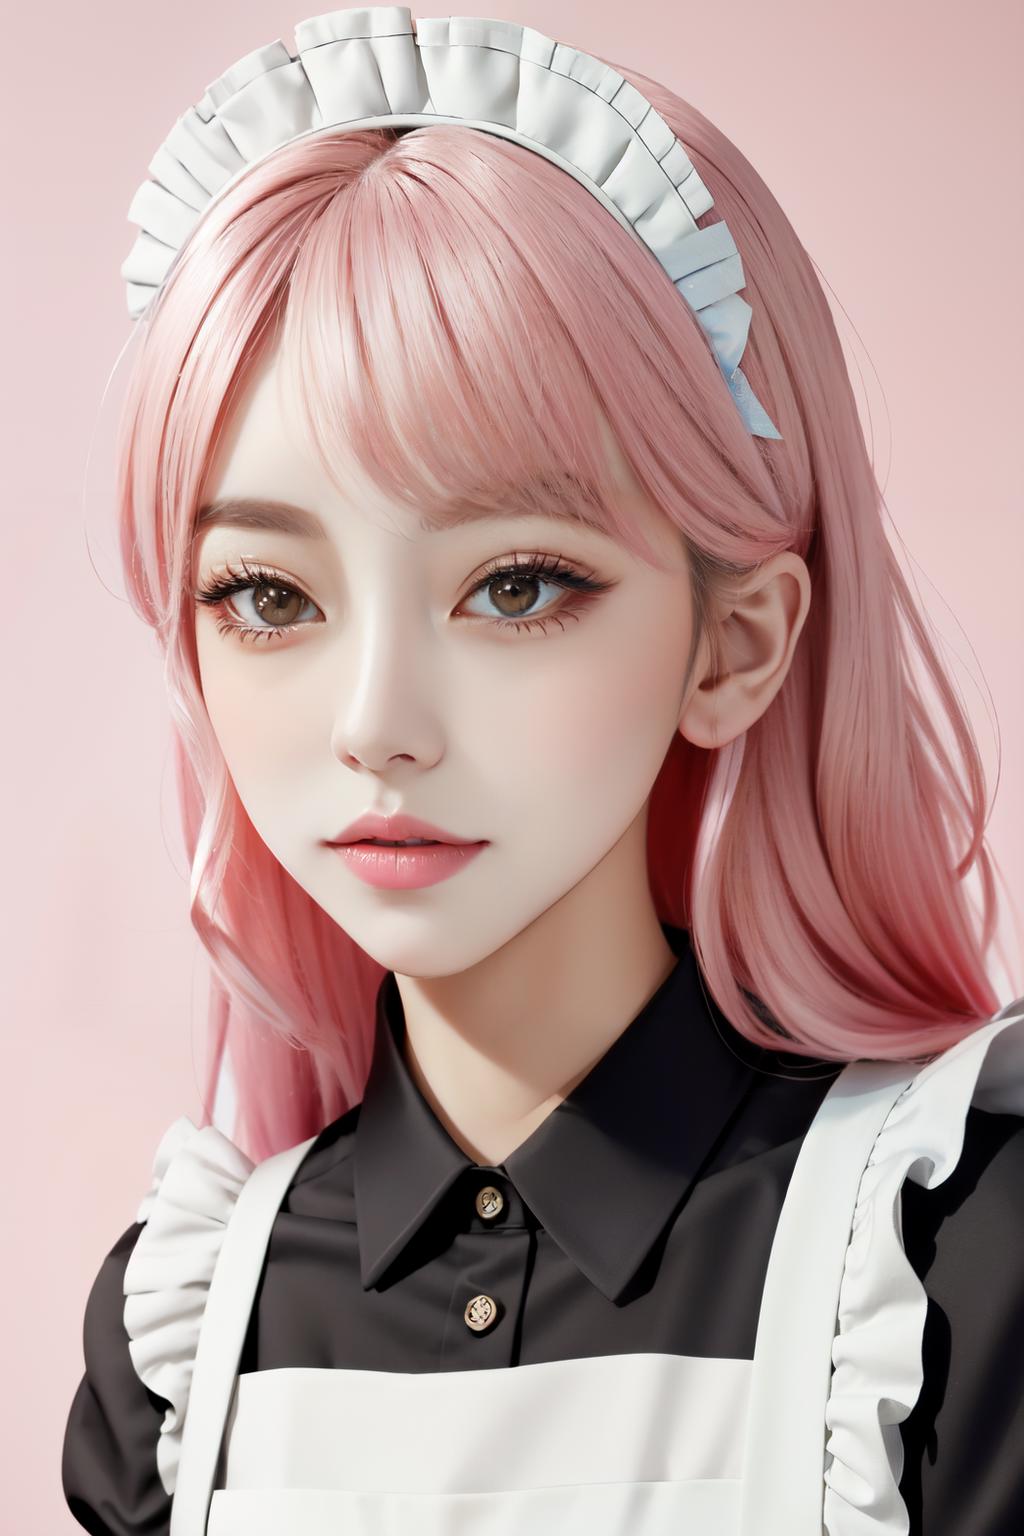 Better Maid Cosplay (Realistic + Anime) | Goofy Ai image by Goofy_Ai